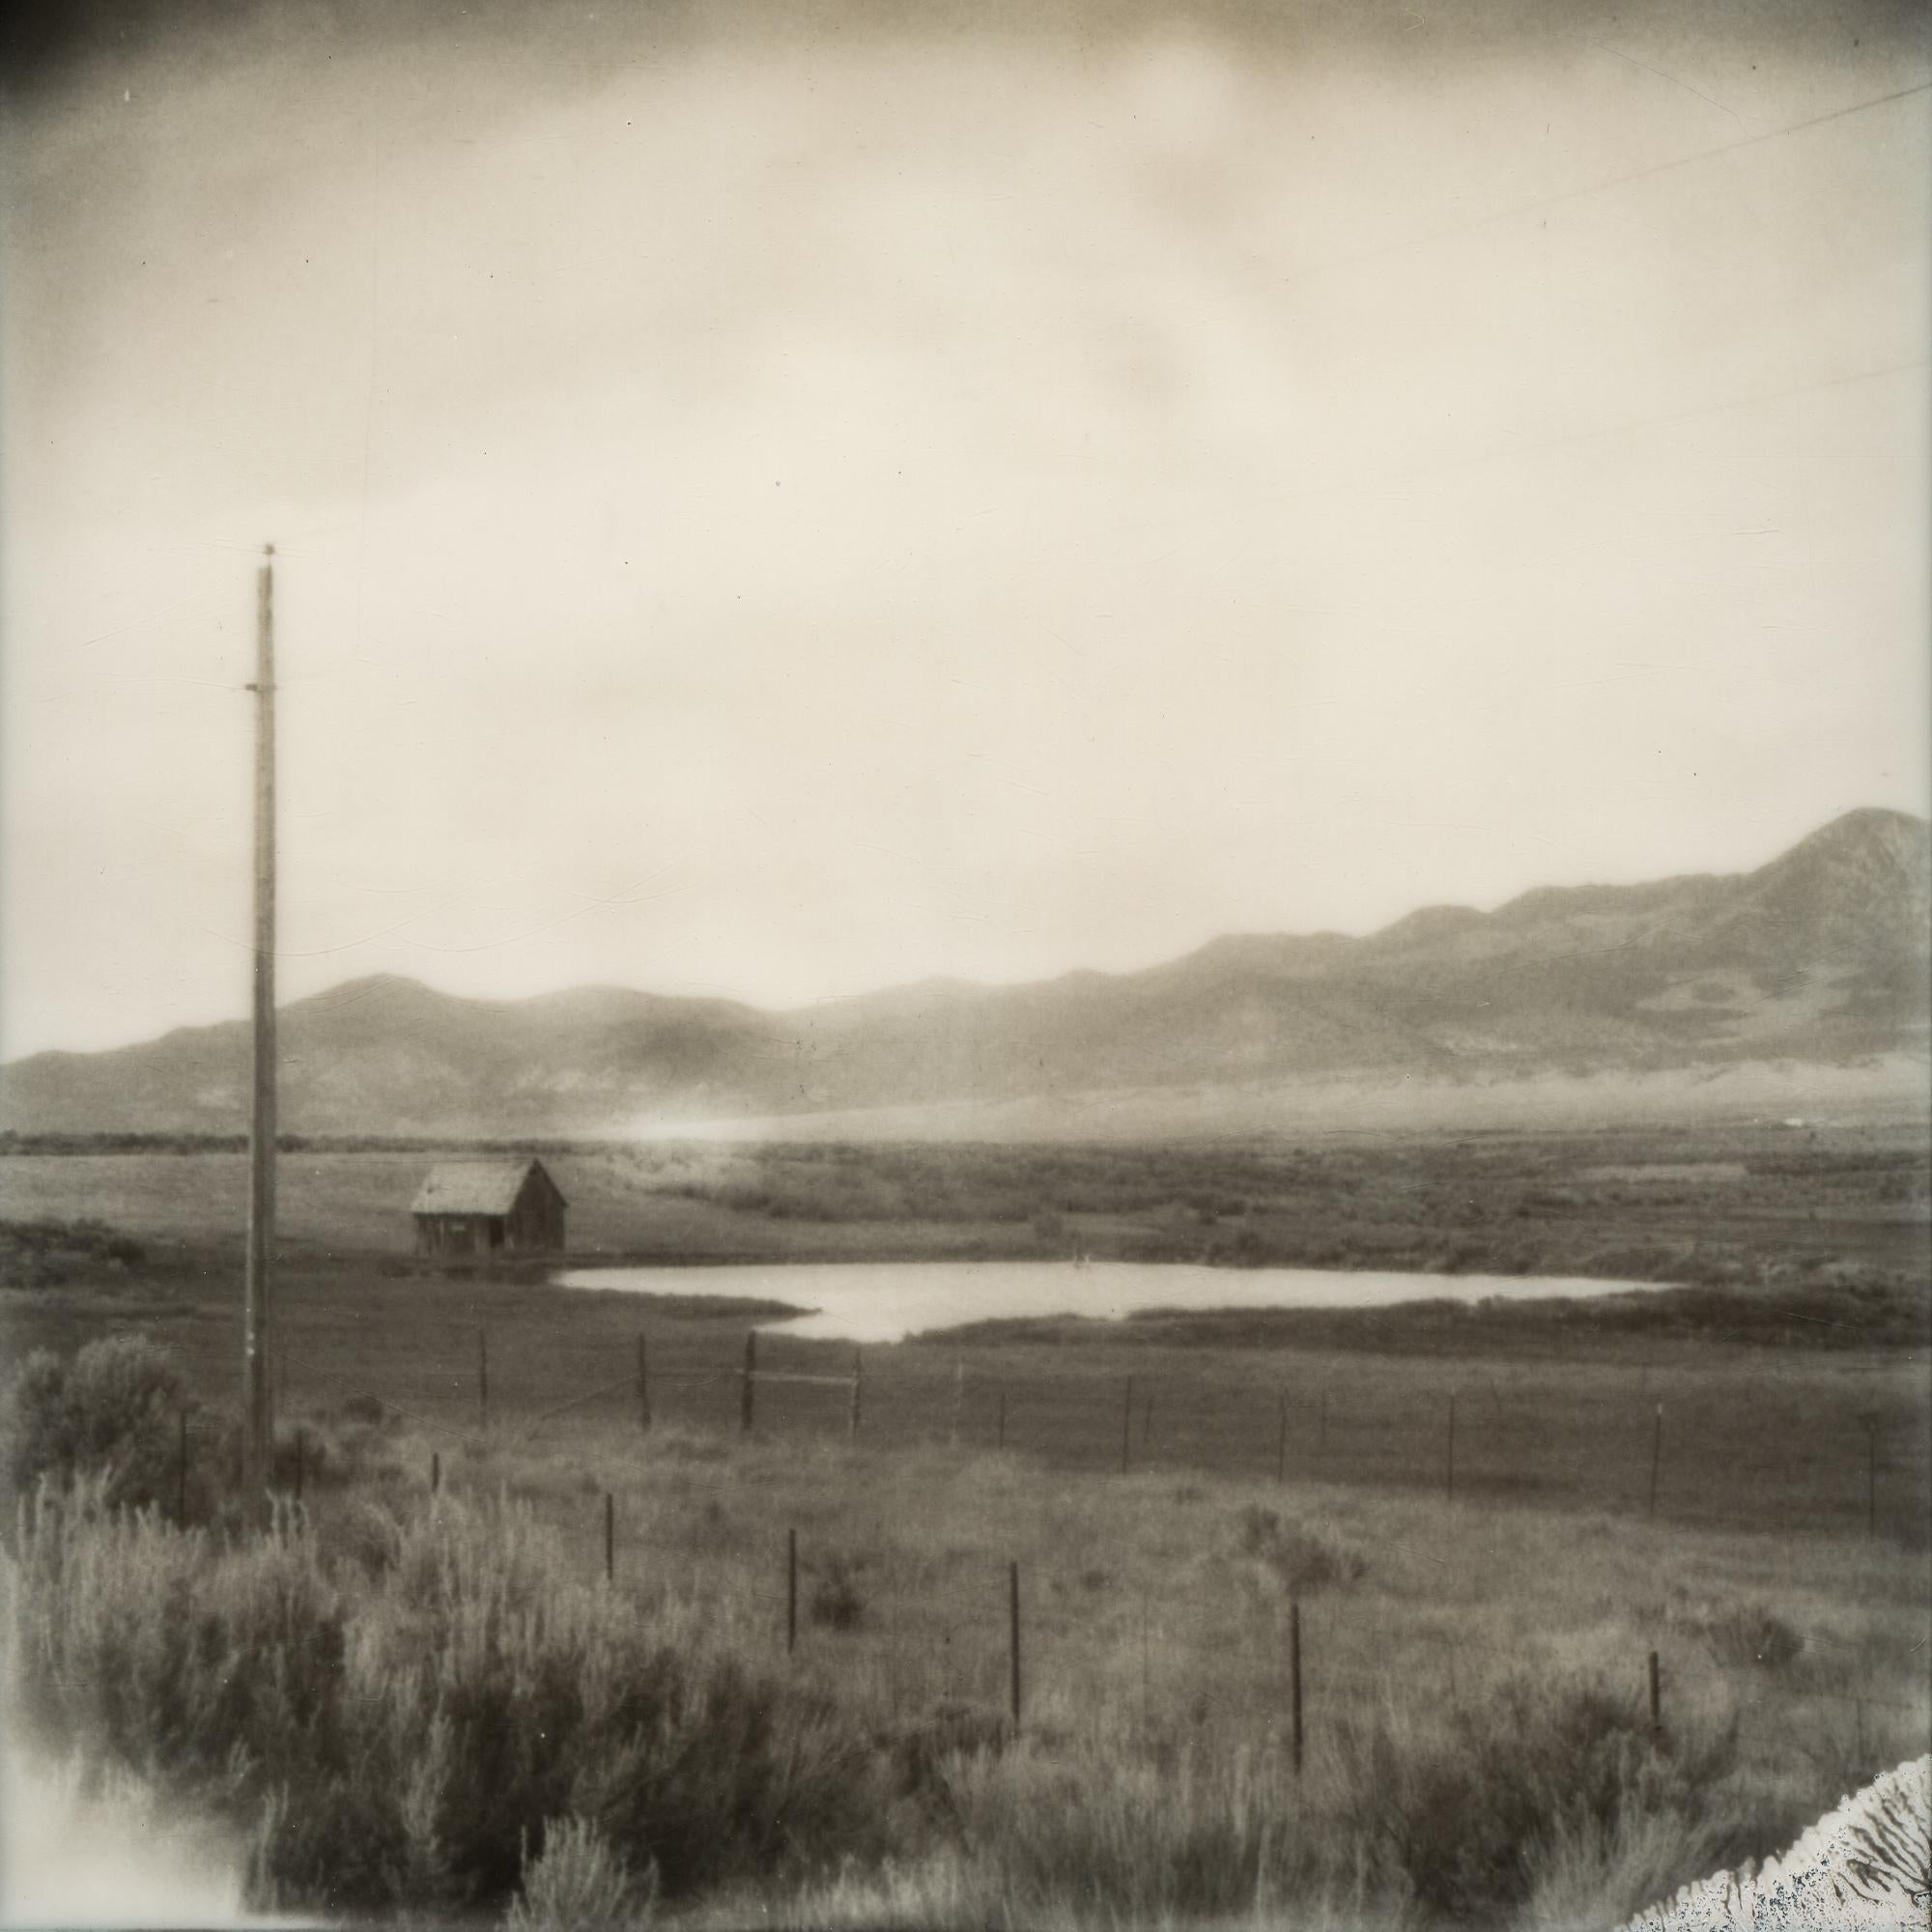 'Little House on the Prairie', 2018, Edition 1/7 plus 2 Artist Proofs, Digital C-print, Based on an original Impossible film, not mounted. Signed on the back and with certificate. Artist inventory PL2018-425

Kirsten Thys van den Audenaerde is a